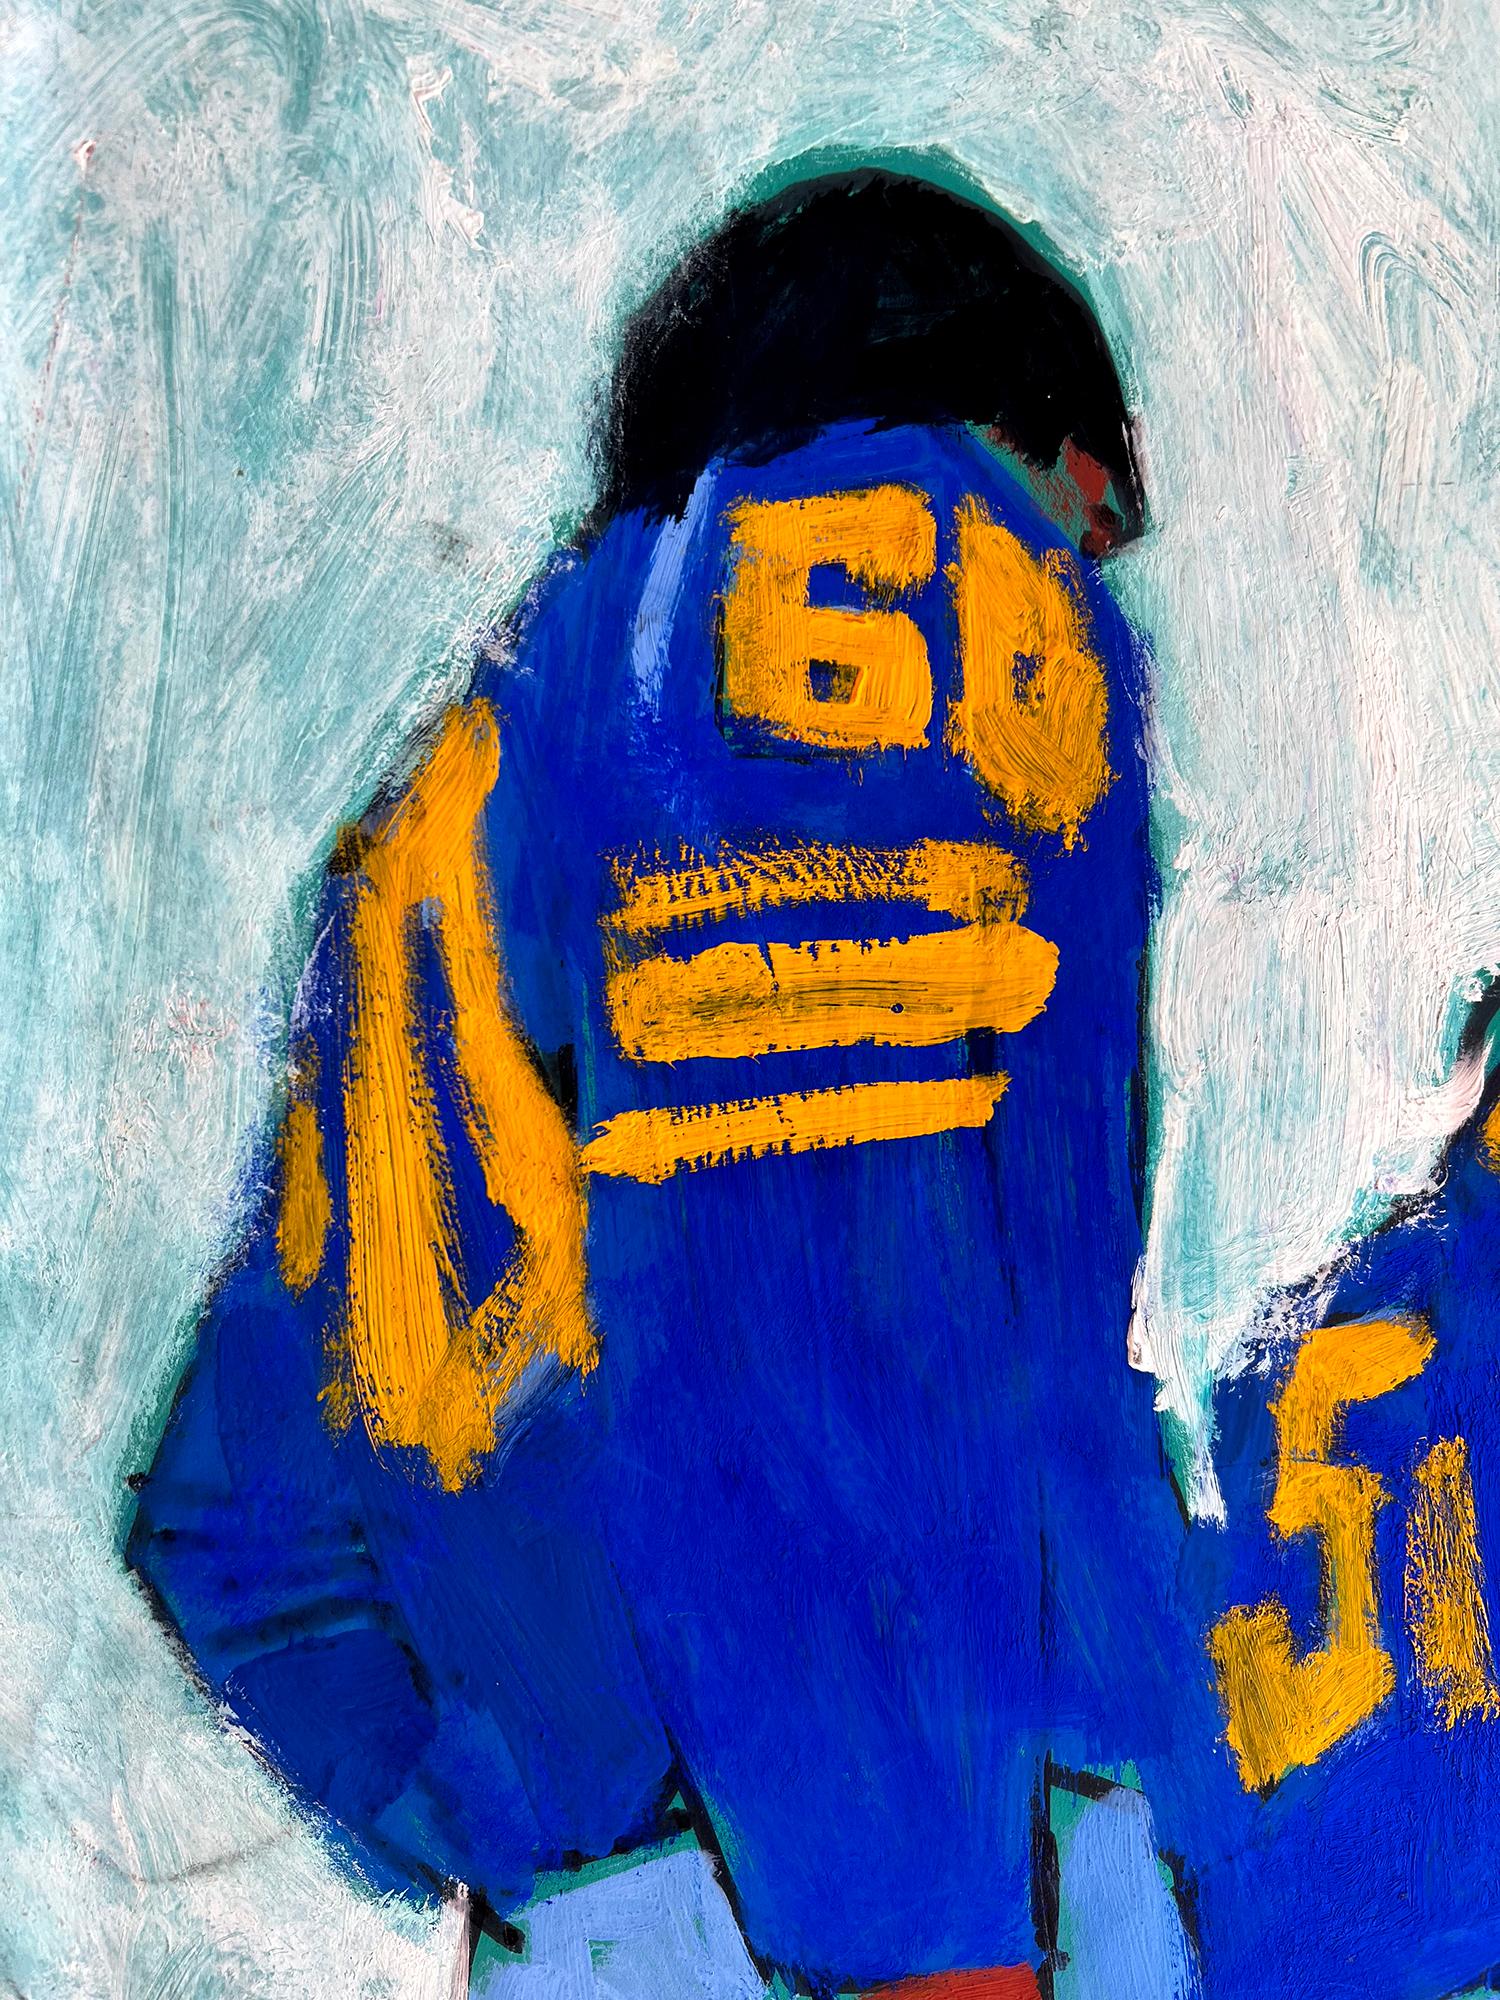 Pregame Football Players Lined Up Abstraction of Blue Jersey and Orange Numbers - Painting by Bob Peak